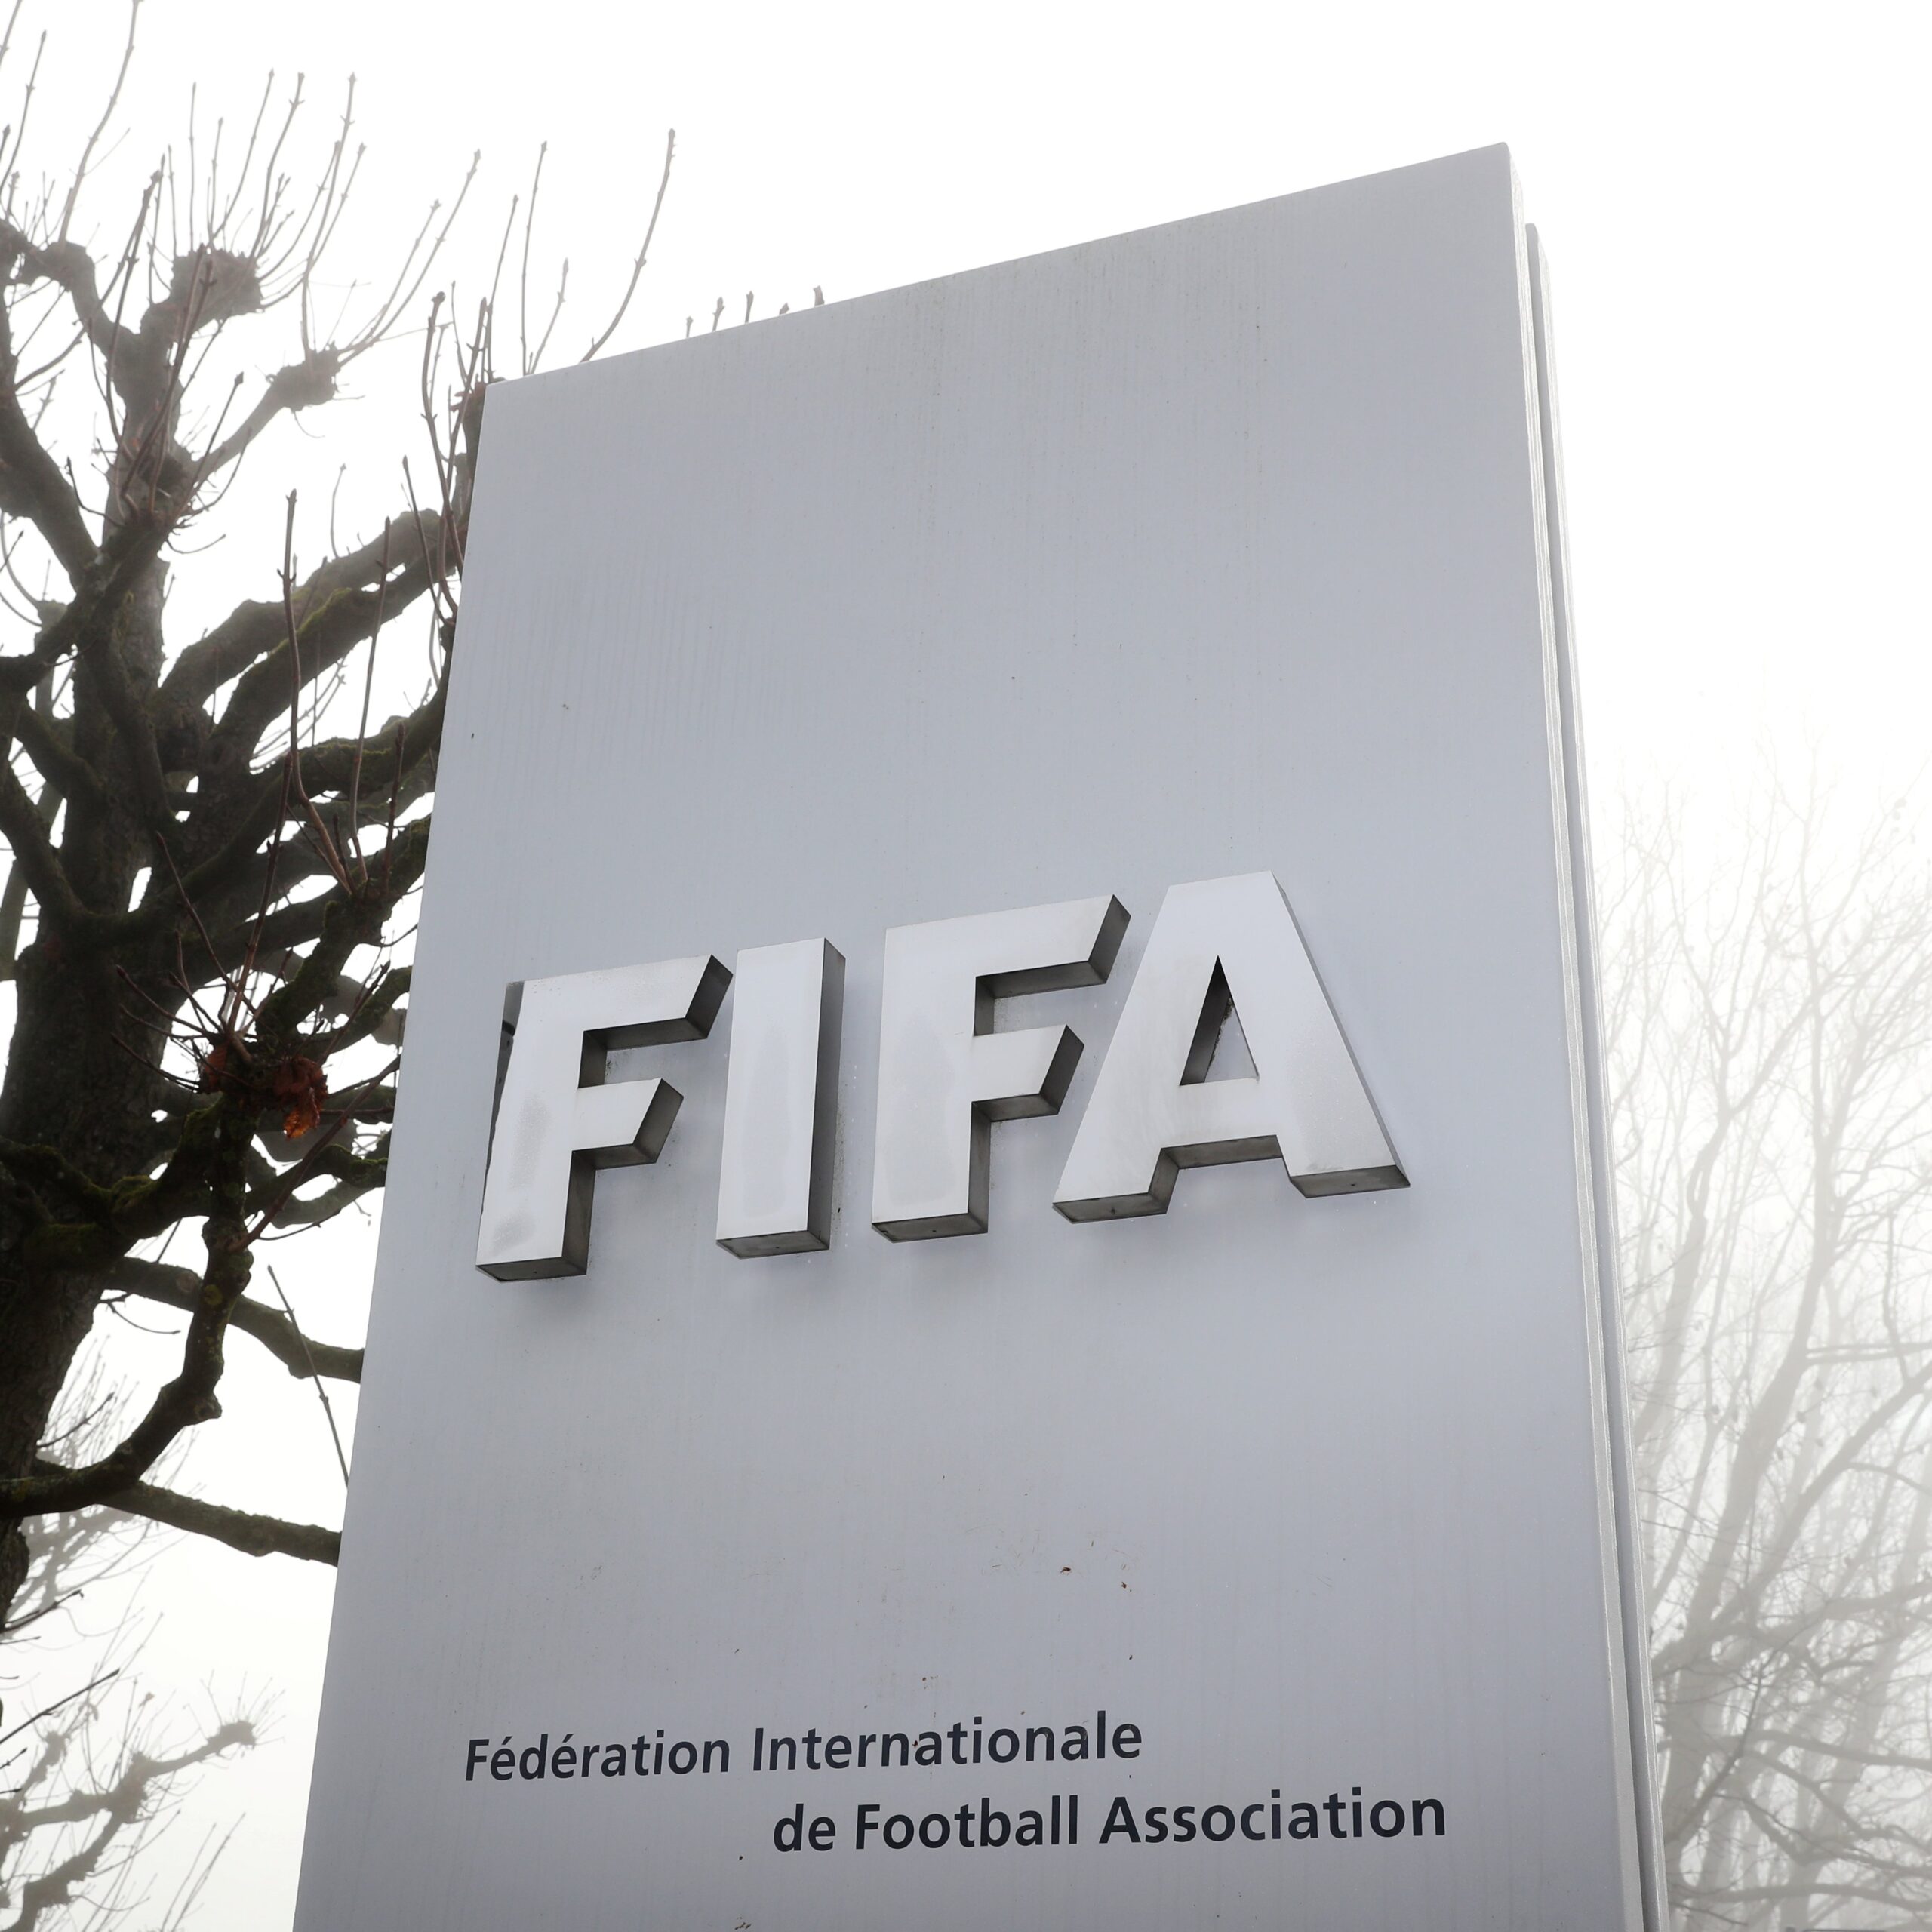  FIFA/UEFA have suspended all Russian clubs and national teams from all competitions